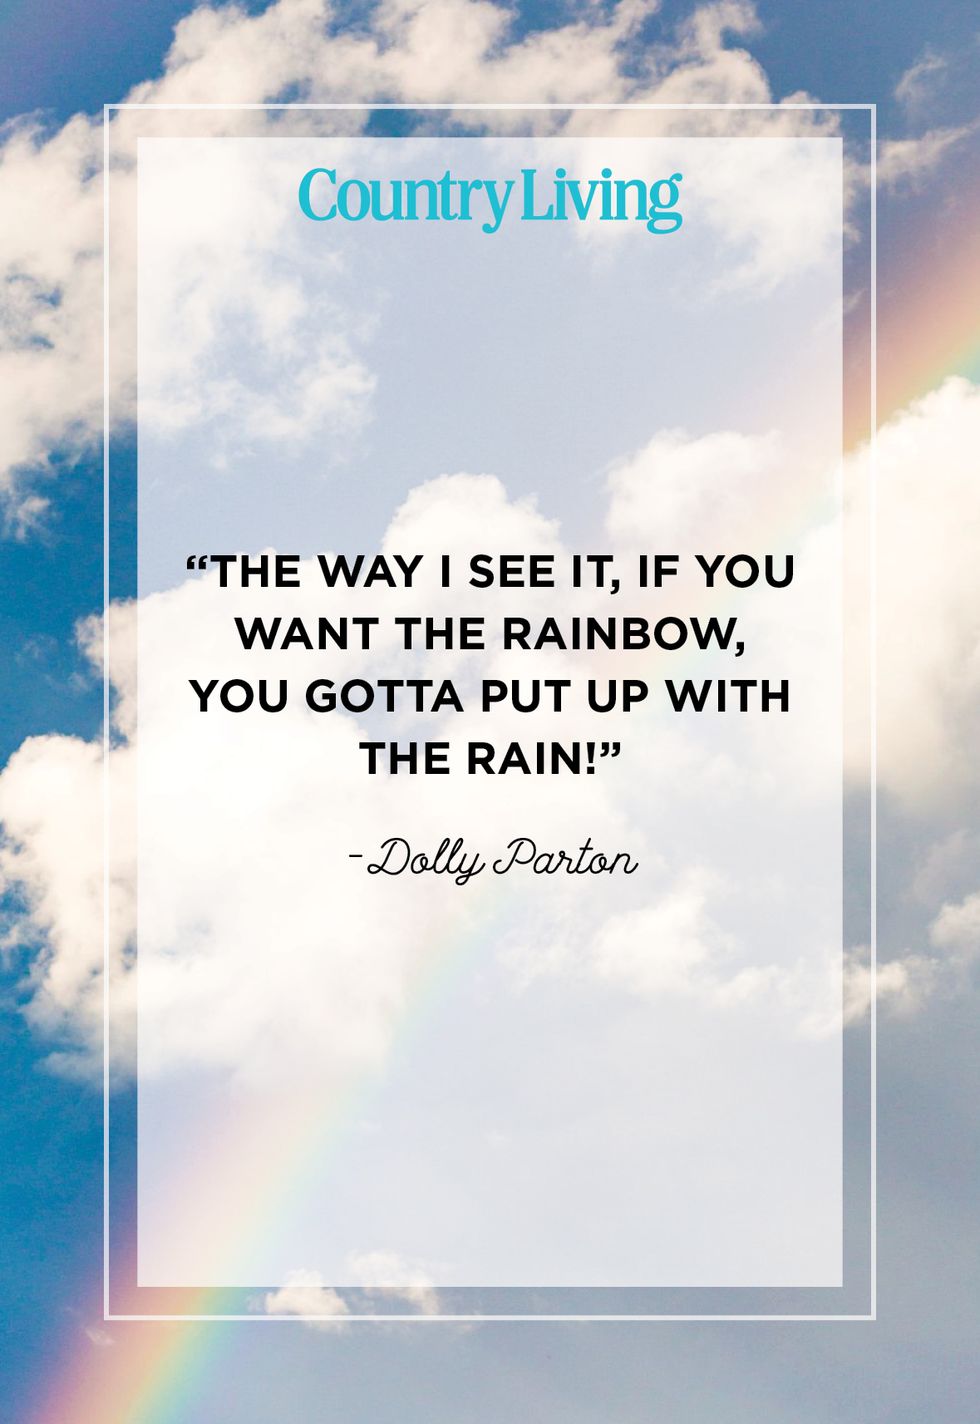 https://hips.hearstapps.com/hmg-prod/images/happiness-quotes-dolly-parton-6467e298a38dd.jpg?crop=1xw:1xh;center,top&resize=980:*